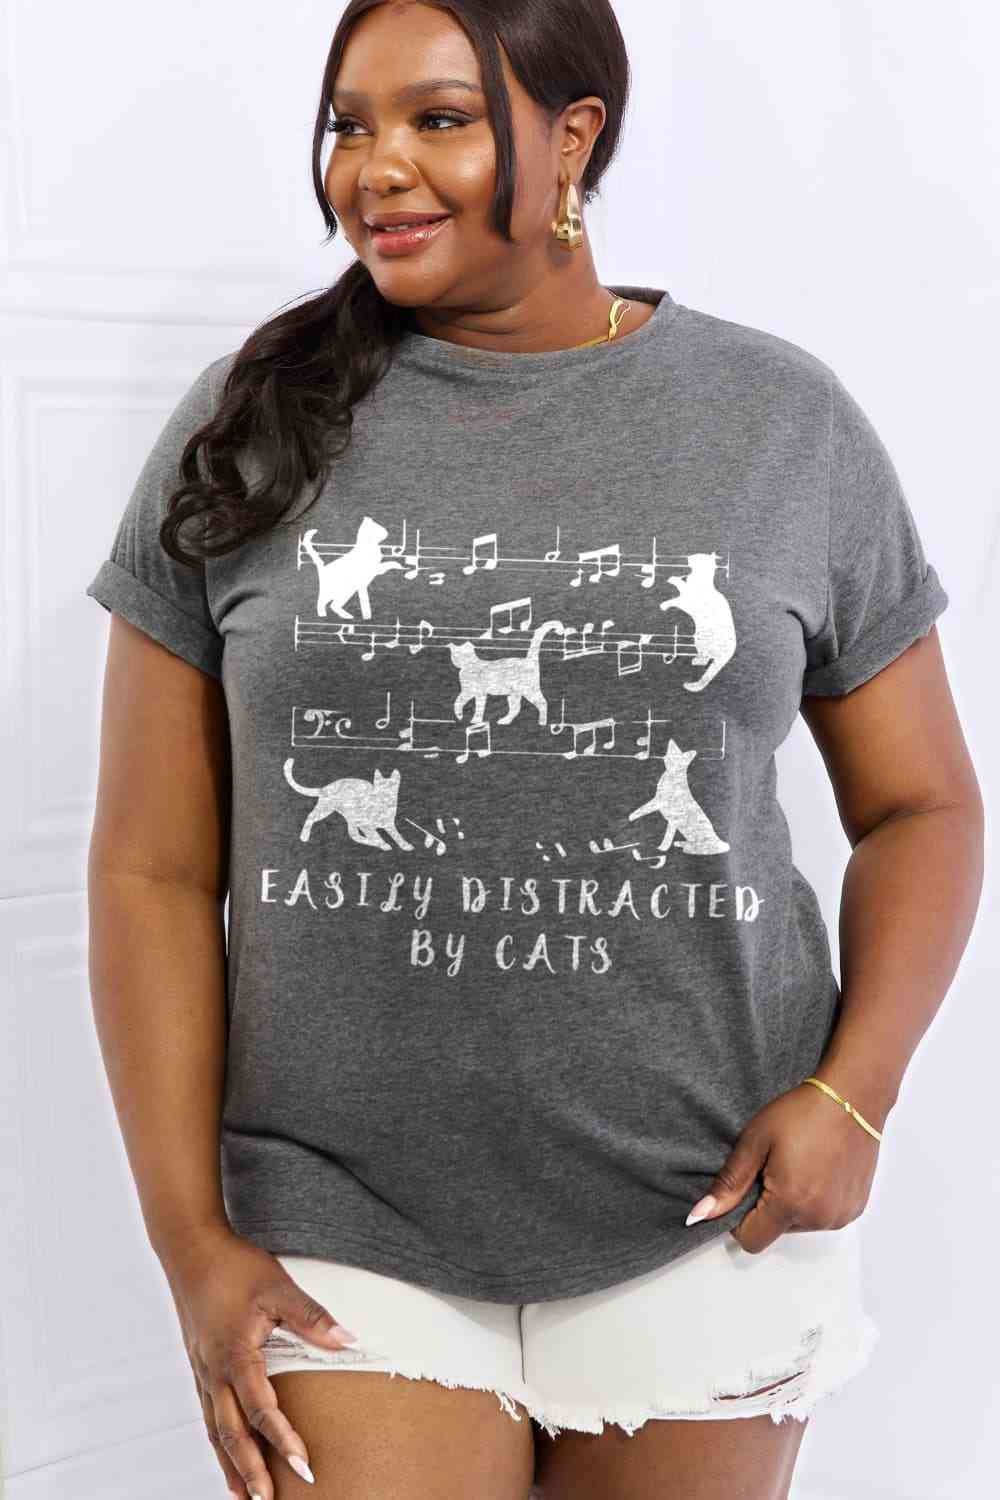 EASILY DISTRACTED BY CATS Graphic Cotton Tee - Gray / S - T-Shirts - Shirts & Tops - 13 - 2024